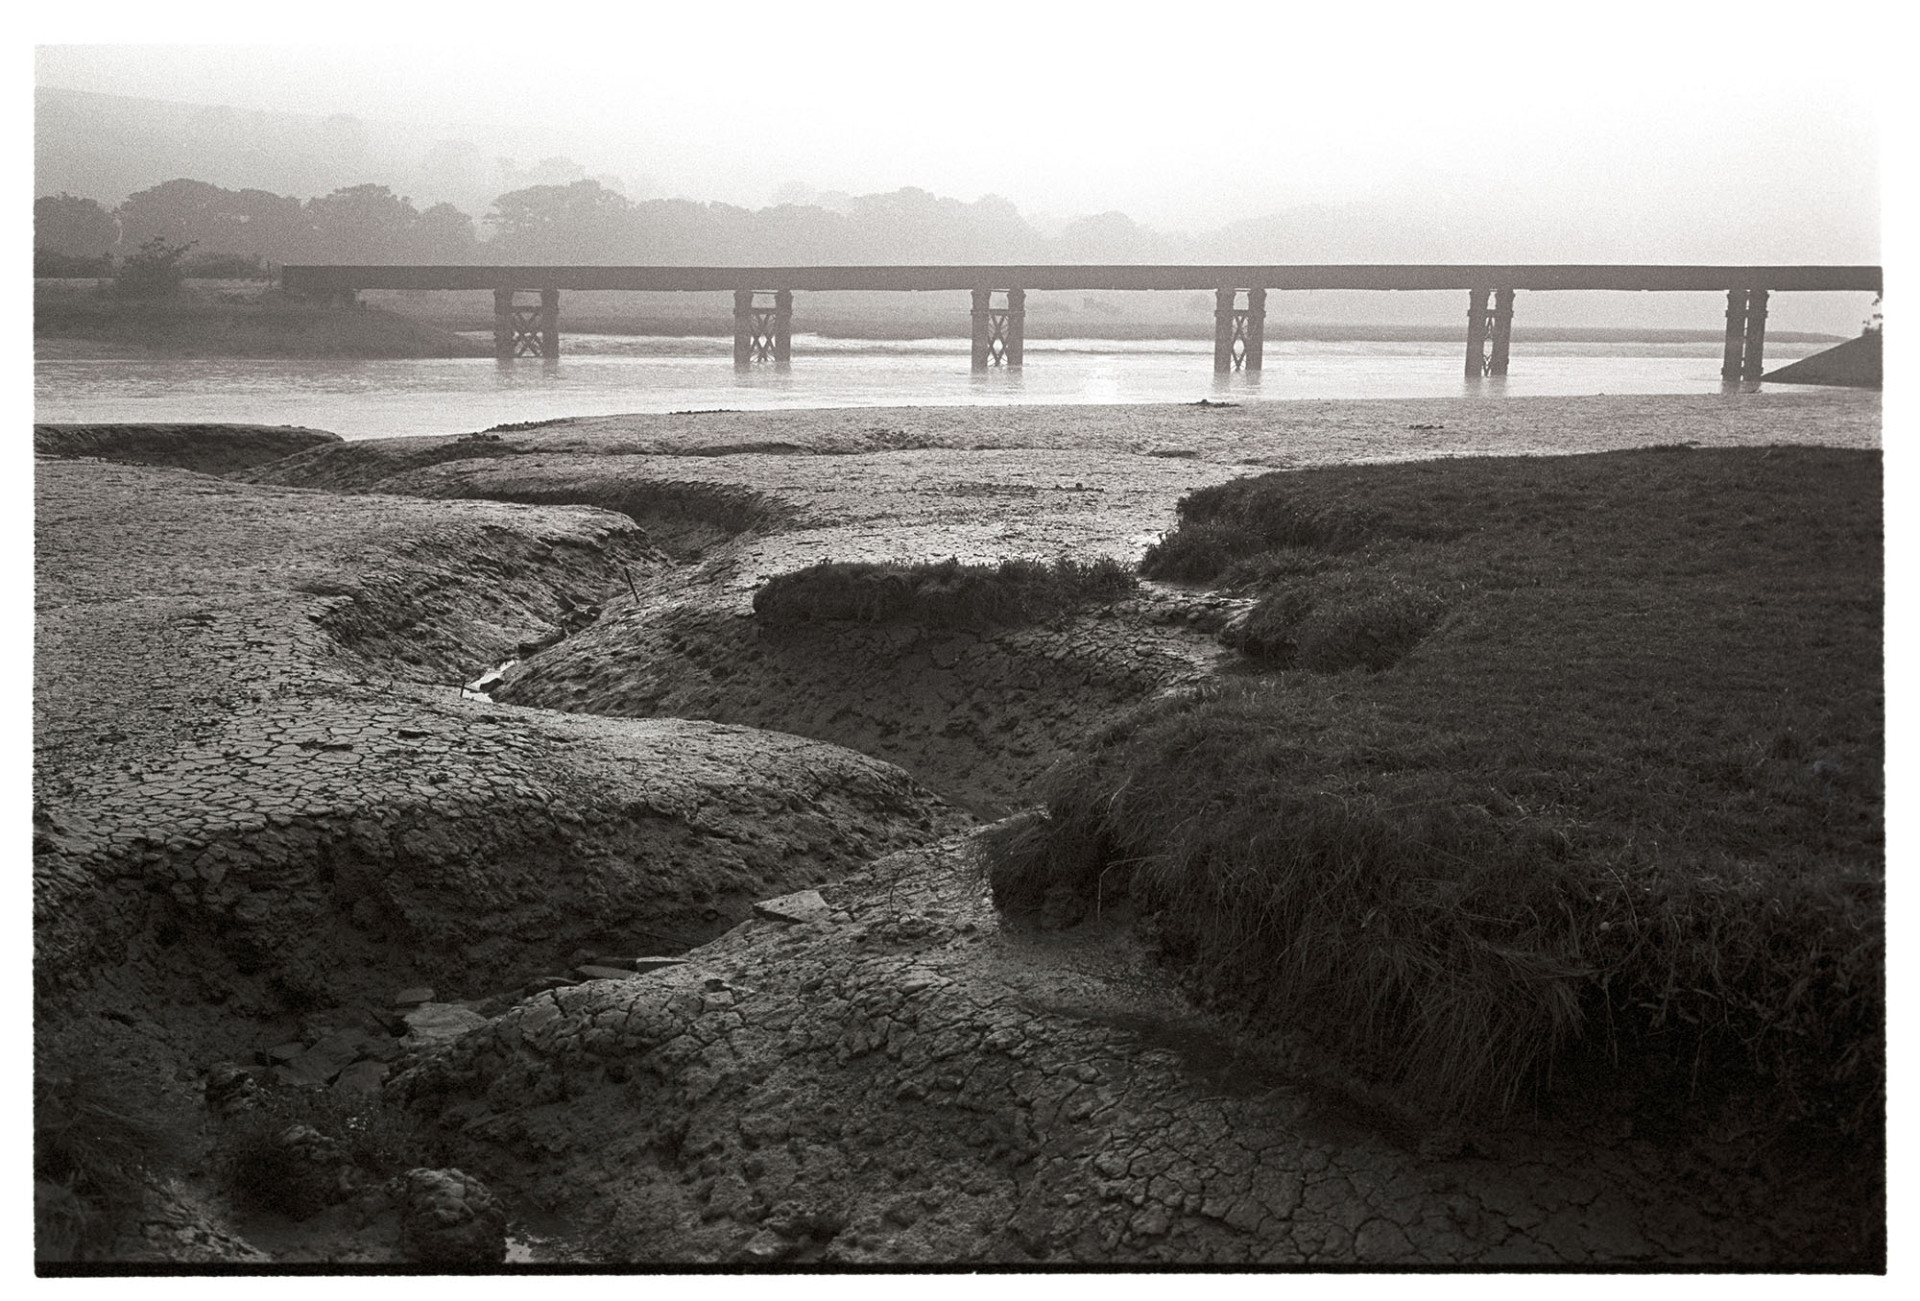 Sun rising over railway bridge over river, mudflats, low tide.
[The sun rising over the railway bridge across the River Torridge at Pillmouth, Landcross at low tide. Mudflats and the course of a rivulet are visible in the foreground.]